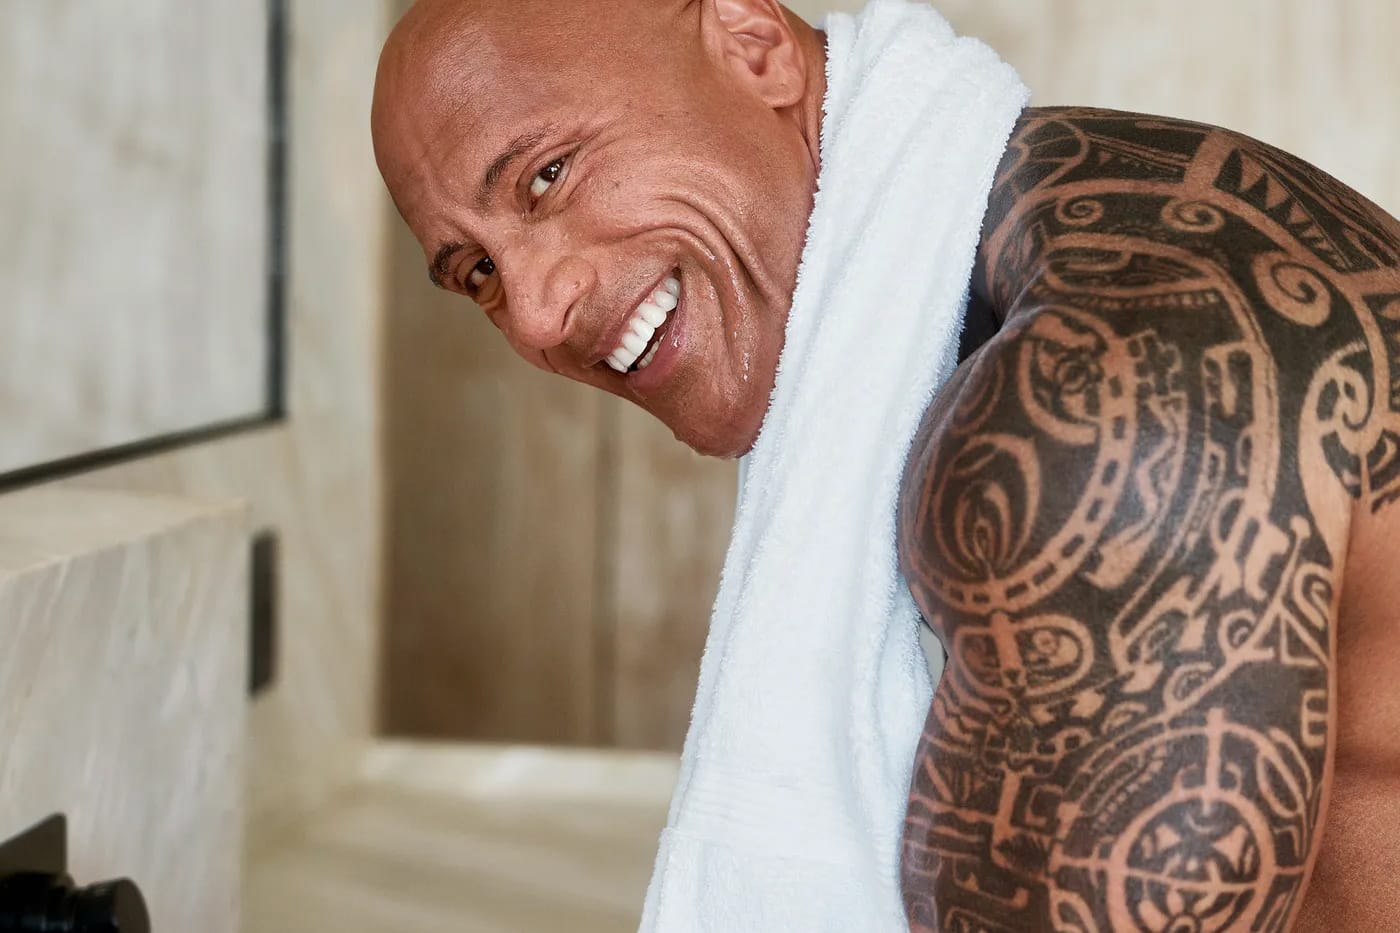 What tattoos does the “Rock” Dwayne Johnson have? - Quora